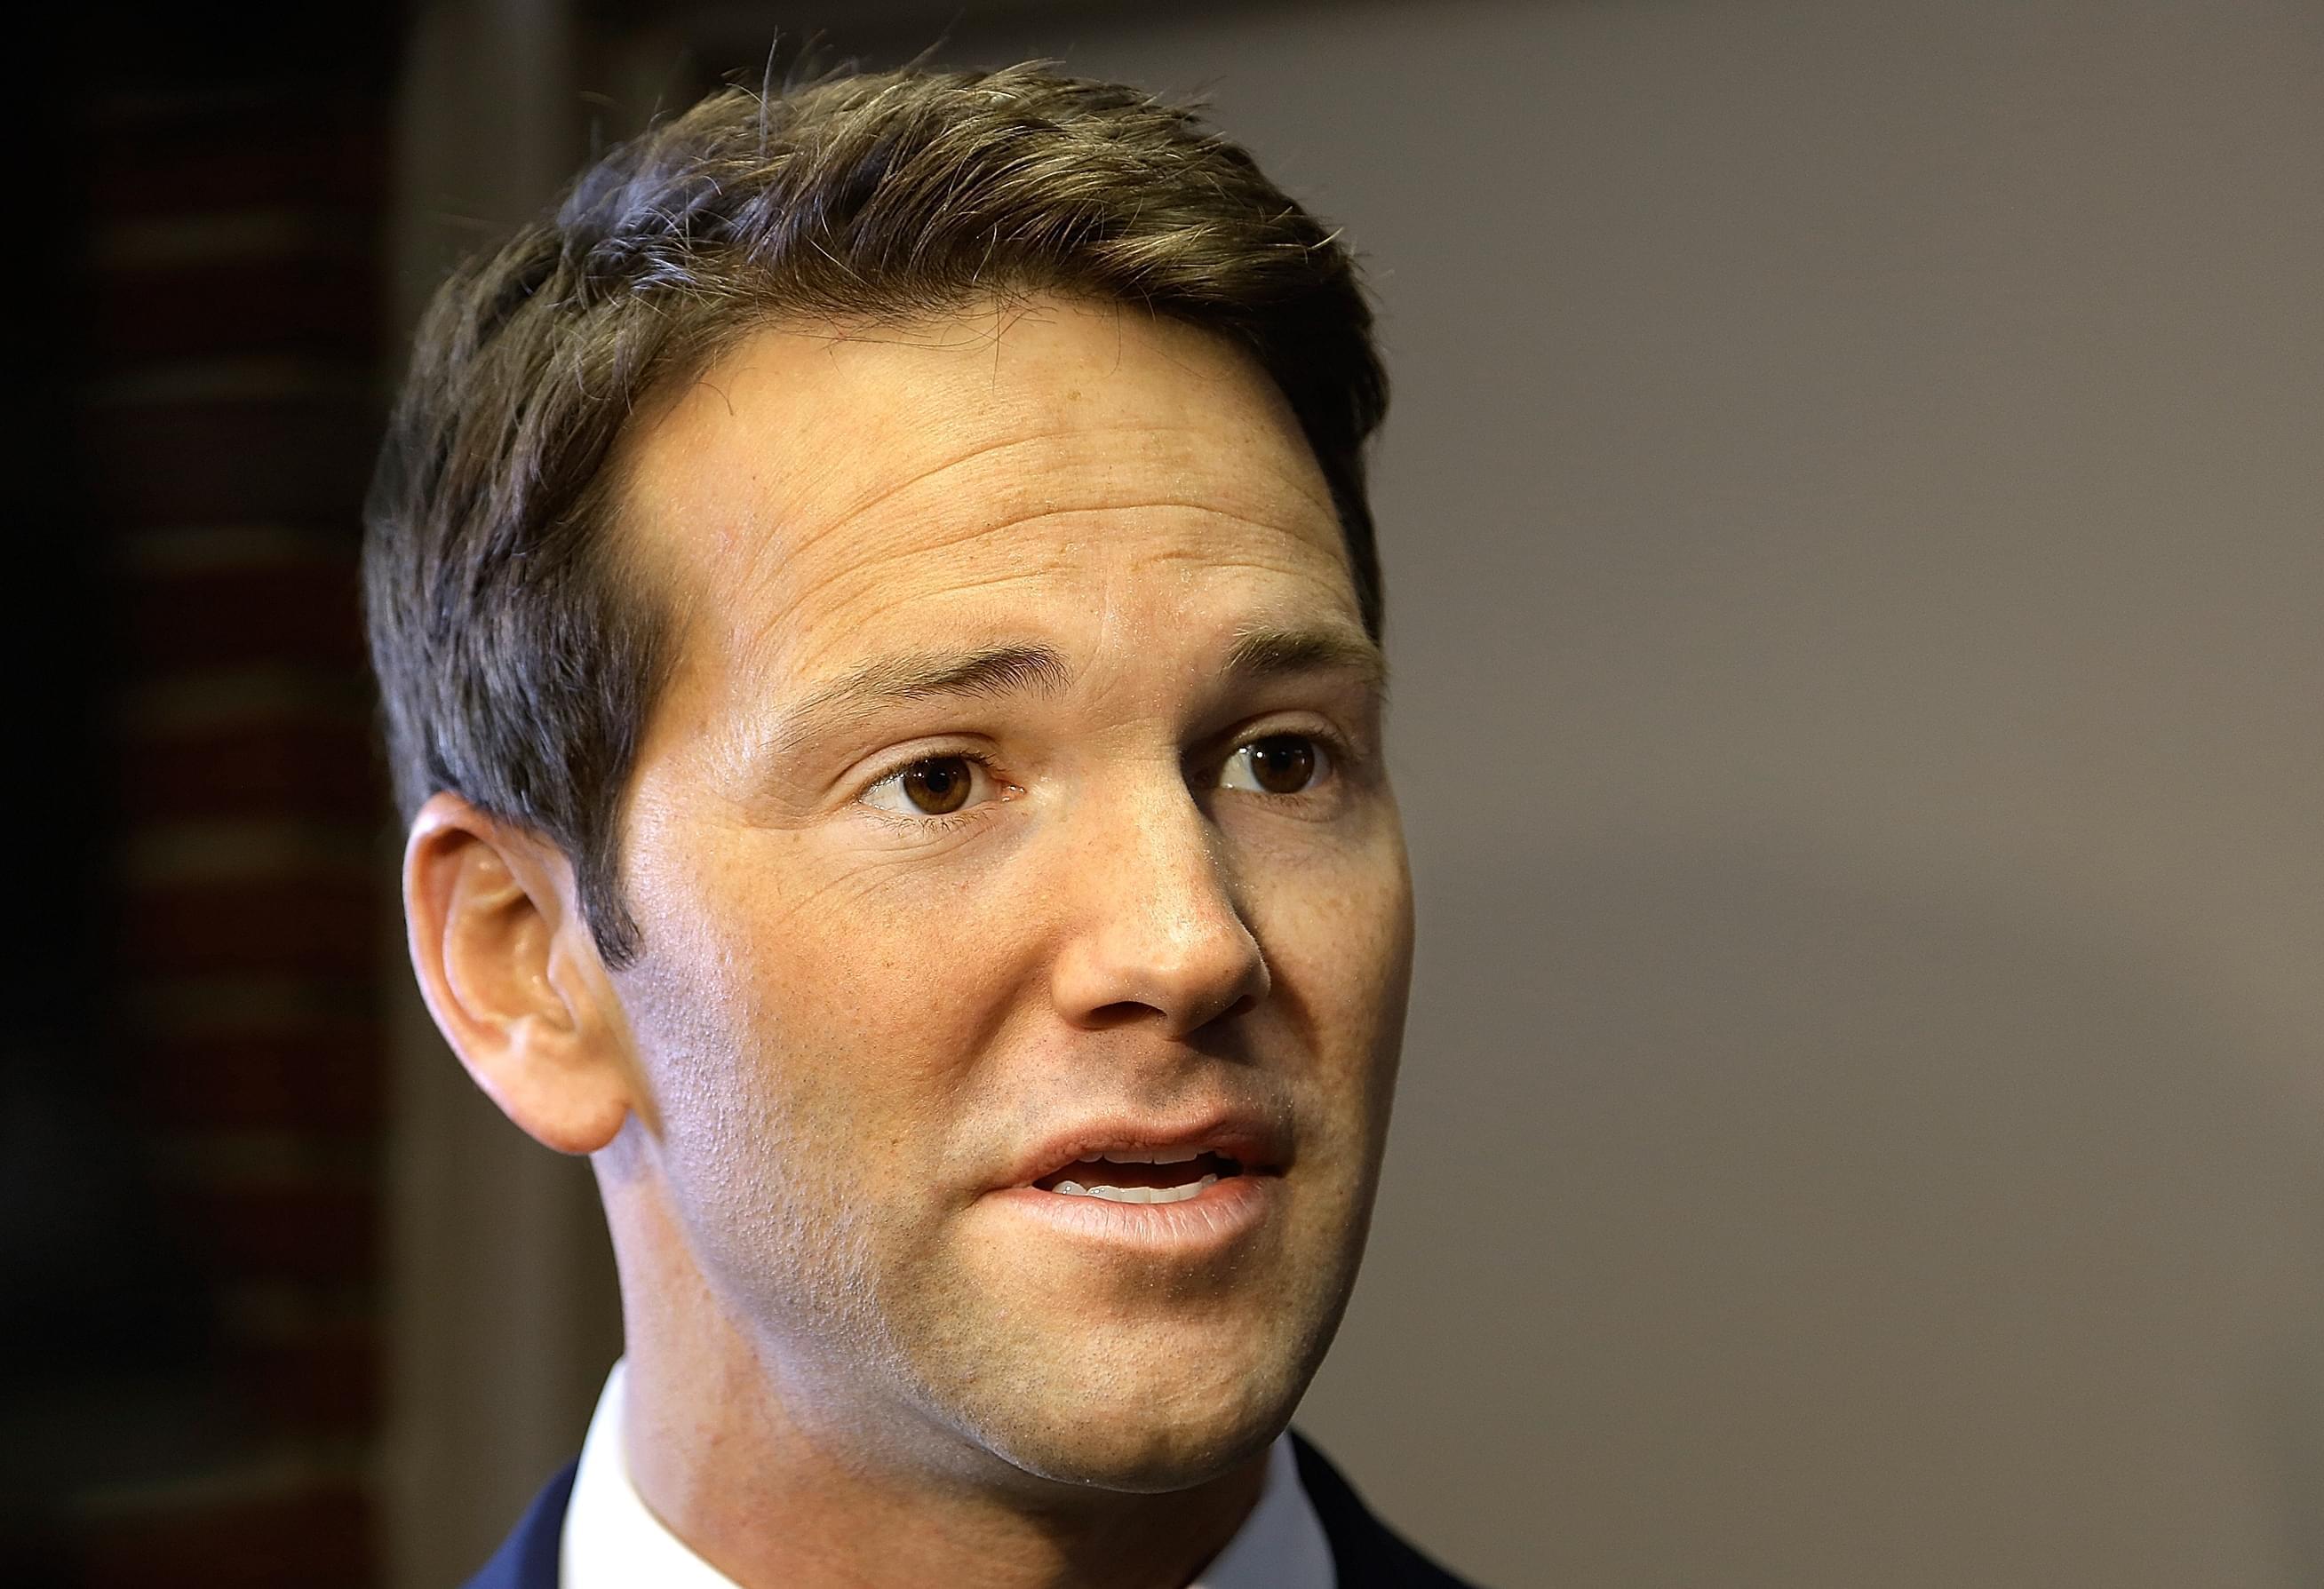 U.S. Rep. Aaron Schock speaks to reporters before meetings with constituents after a week in which he faced twin scandals Friday, Feb. 6